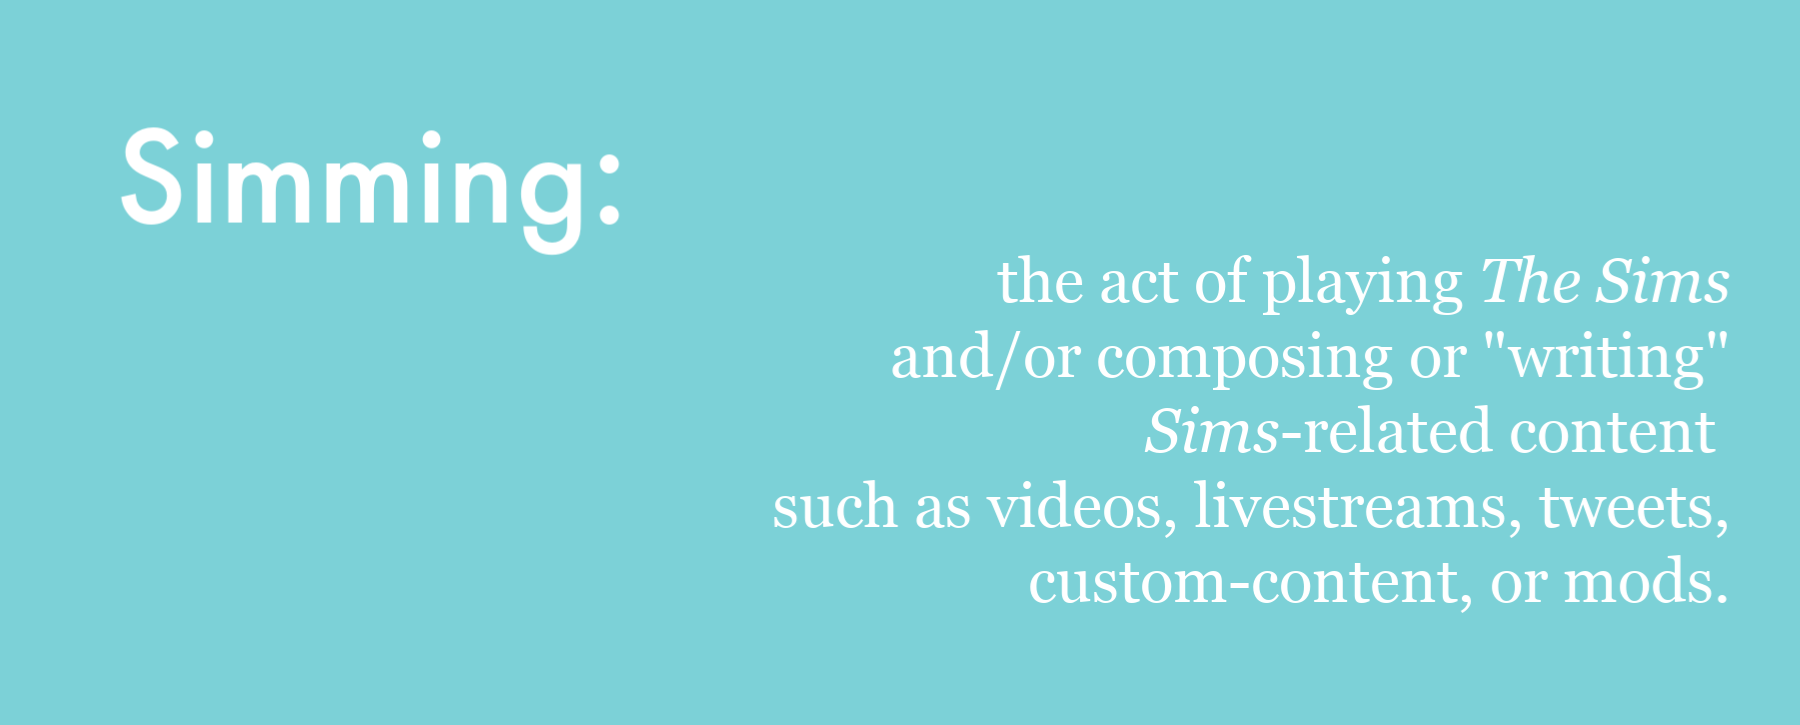 Simming is the act of playing The Sims and/or composing or writing sims related content such as videos, livestreams, tweets, custom-content, or mods